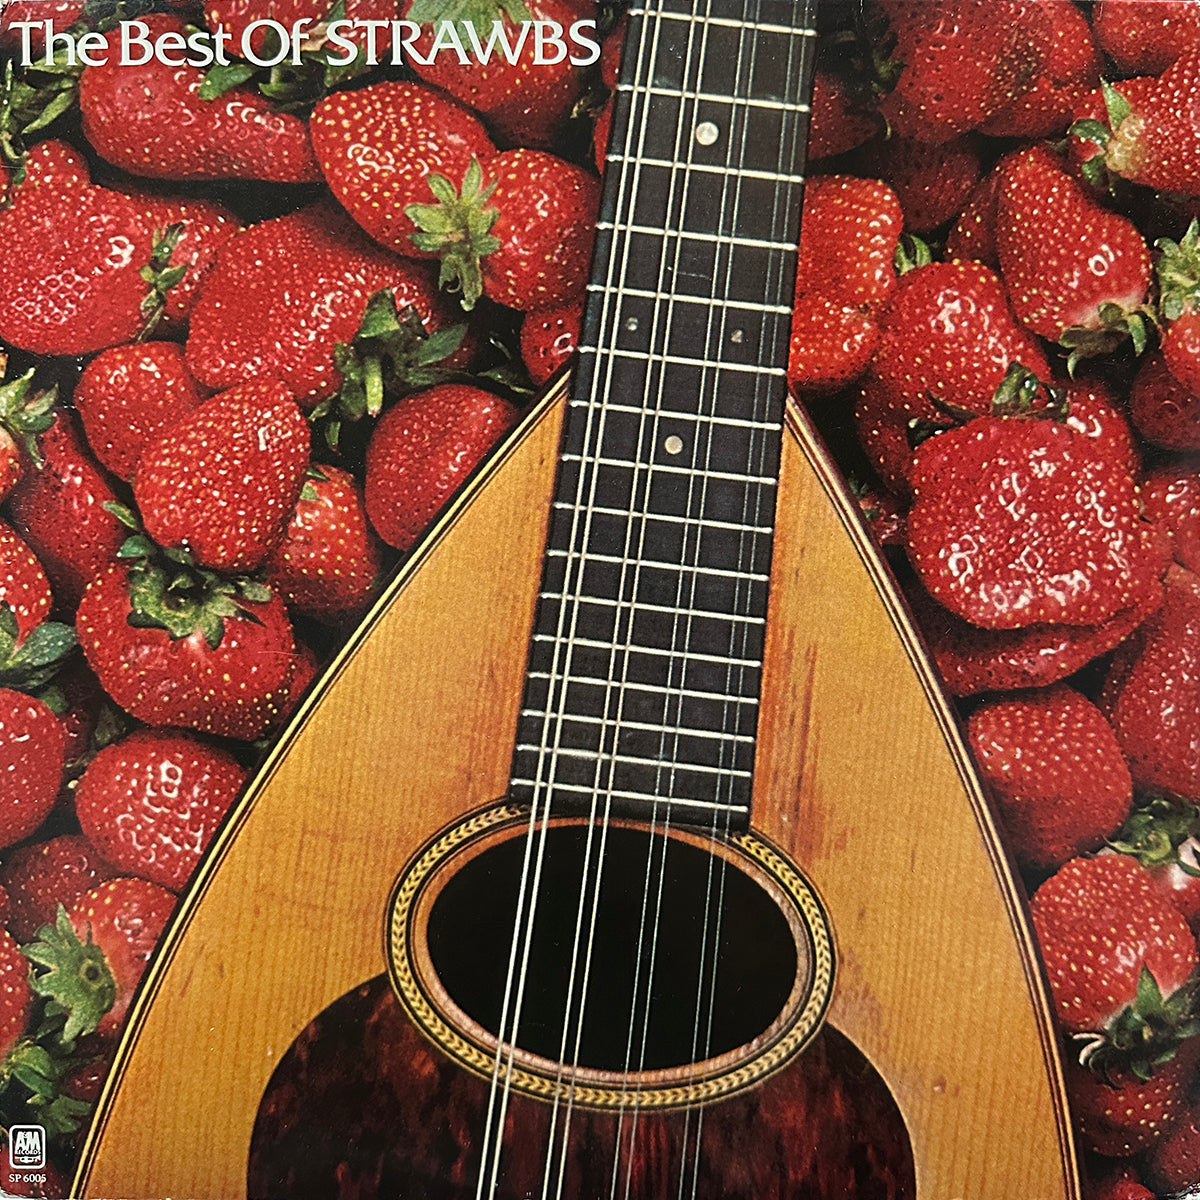 The Best Of Strawbs